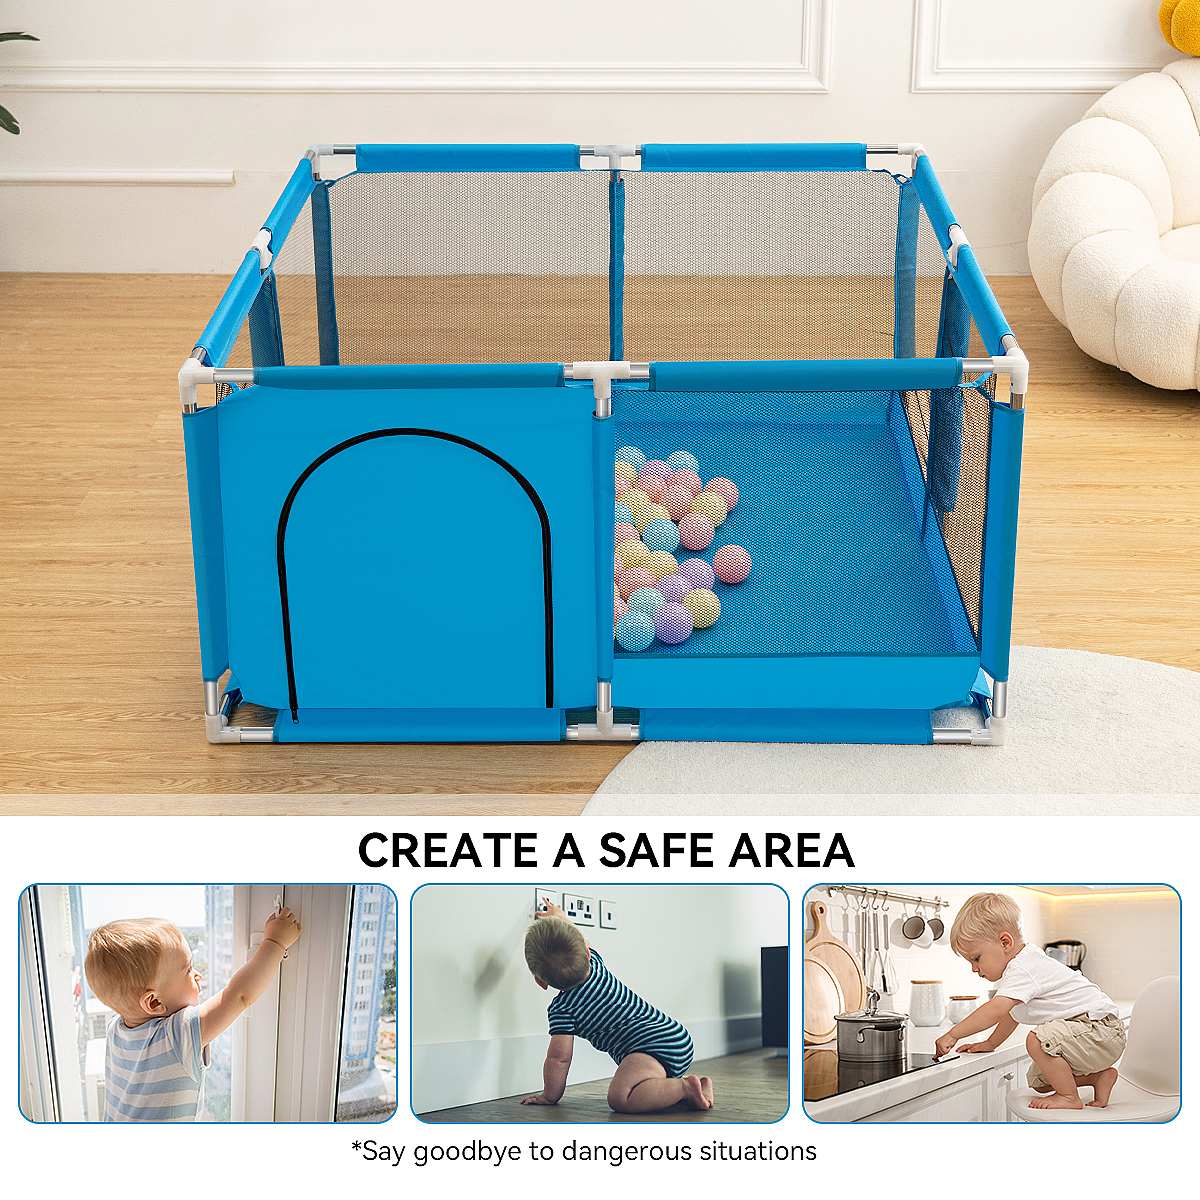 Baby Playpen,Outdoor Play Yard,Portable 4-Panel Baby Safety Playpen for Infant Toddler,Blue - image 5 of 5